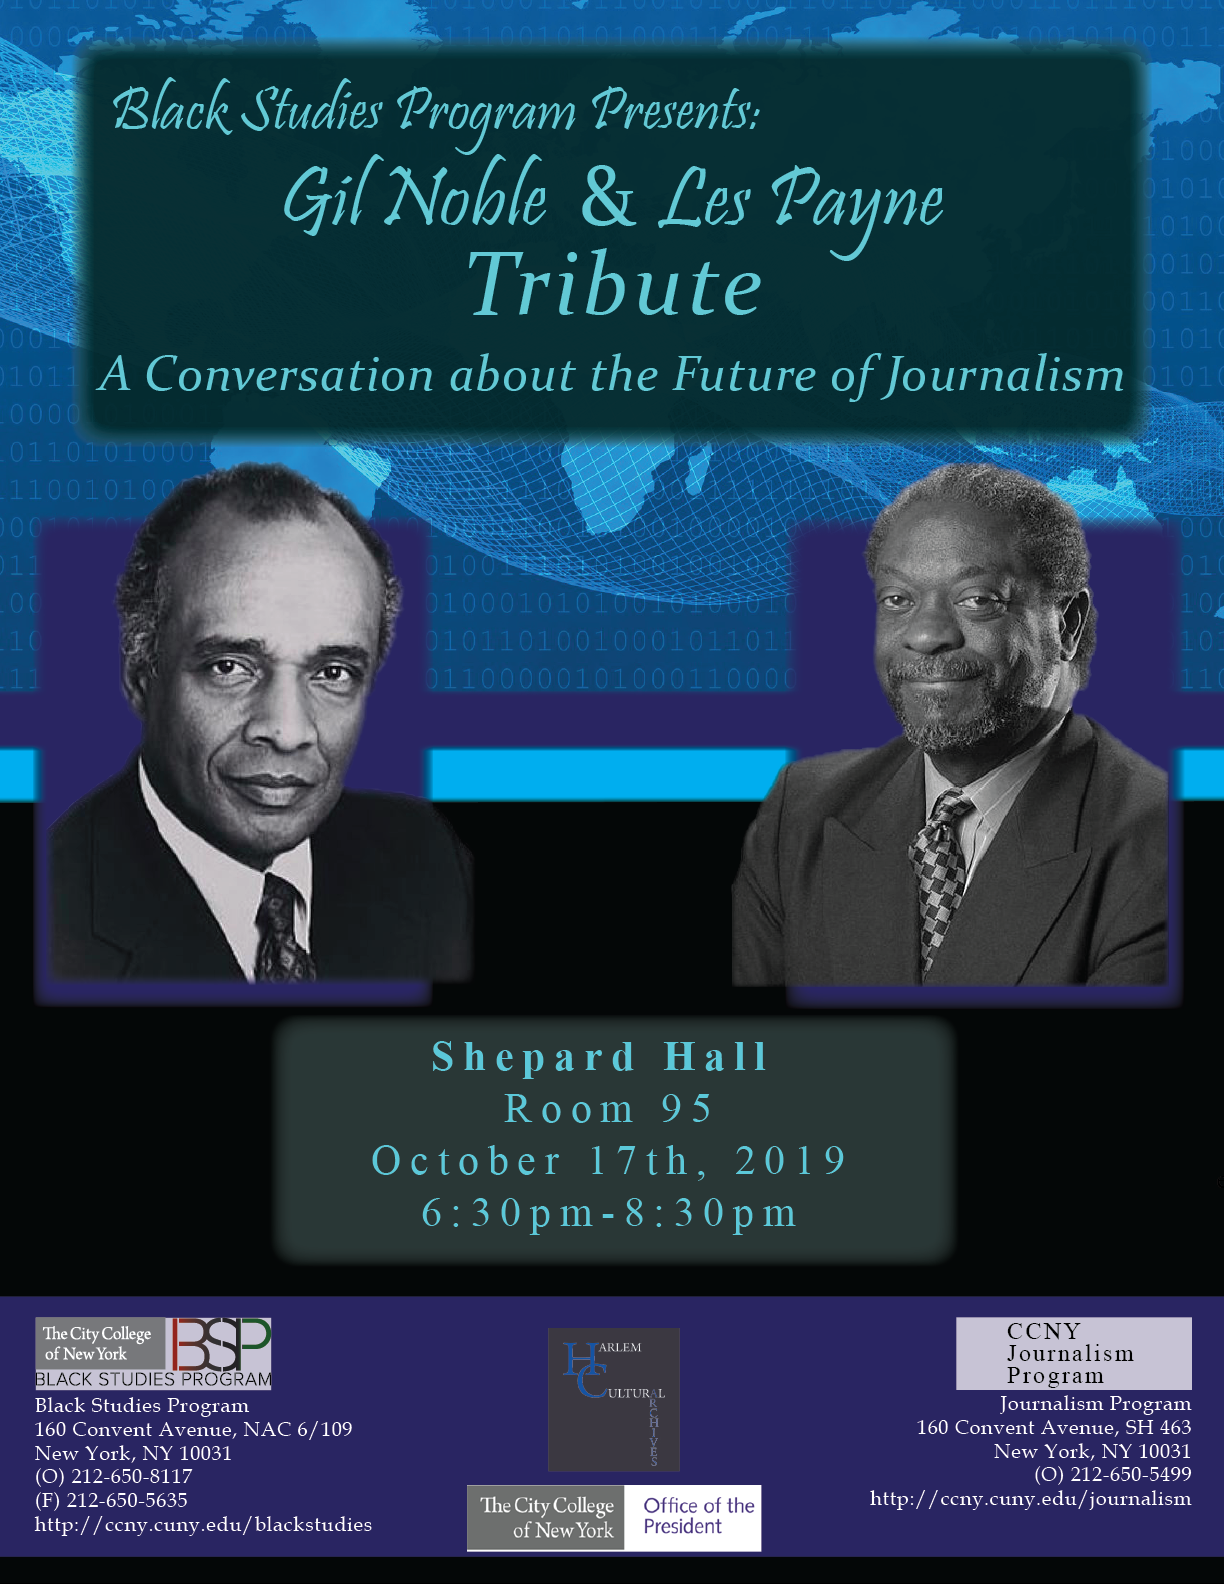 This is a blue flyer two photos, one of Gil Noble & Les Payne. In blue text, Tribute : A conversation about the future of journalism. Shepard hall room 95. October 17th, 2019 at 6:30pm to 8:30pm. Presented by the Black Studies Program and CCNY Journalism Program. 